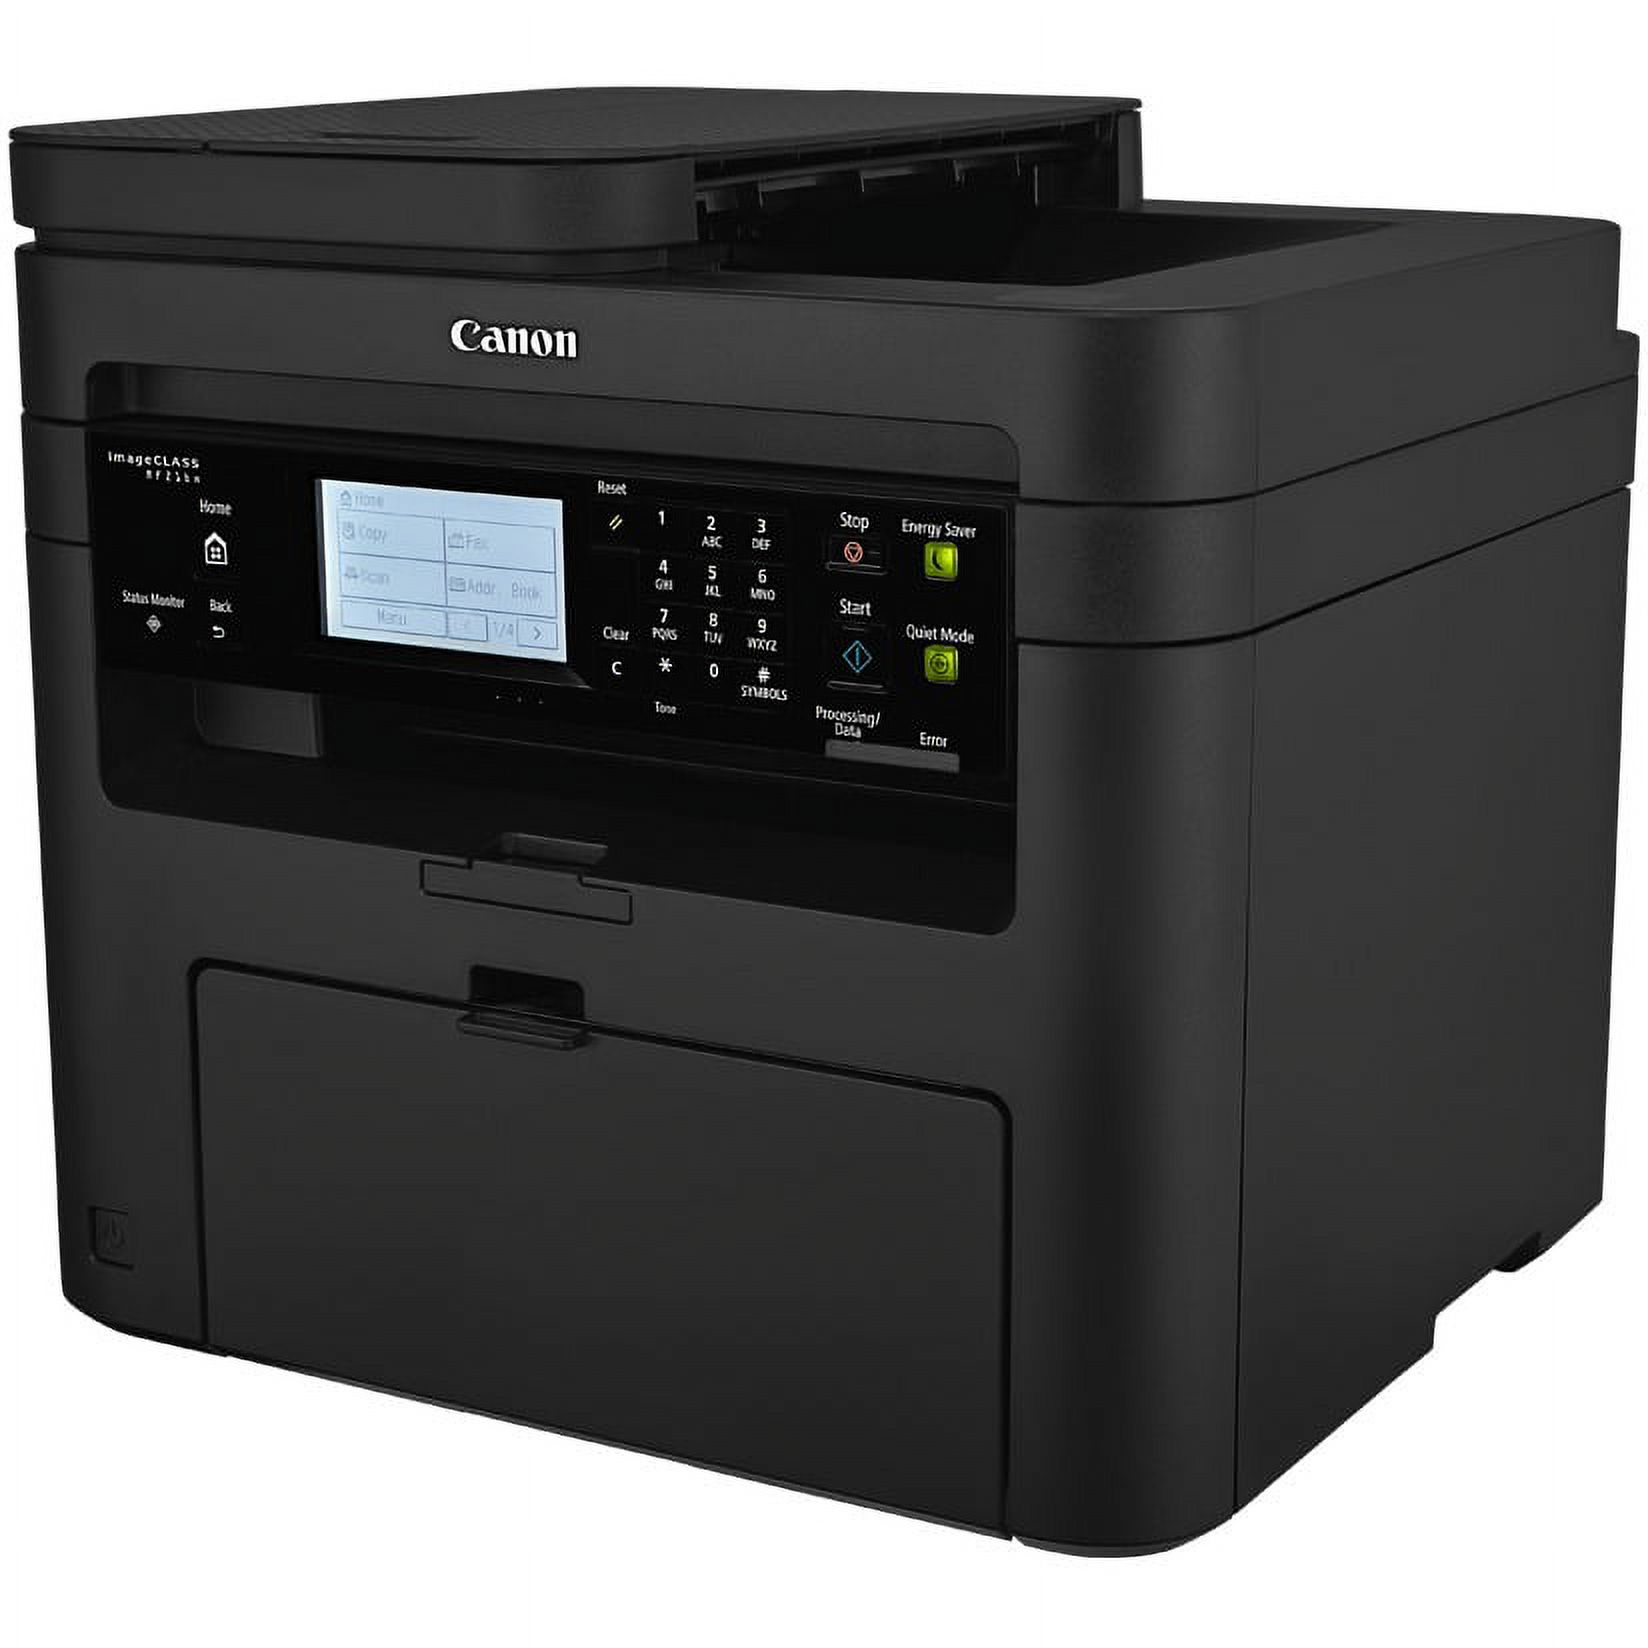 imageCLASS MF216n All-in-One Laser AirPrint Printer Copier Scanner Fax - image 3 of 4